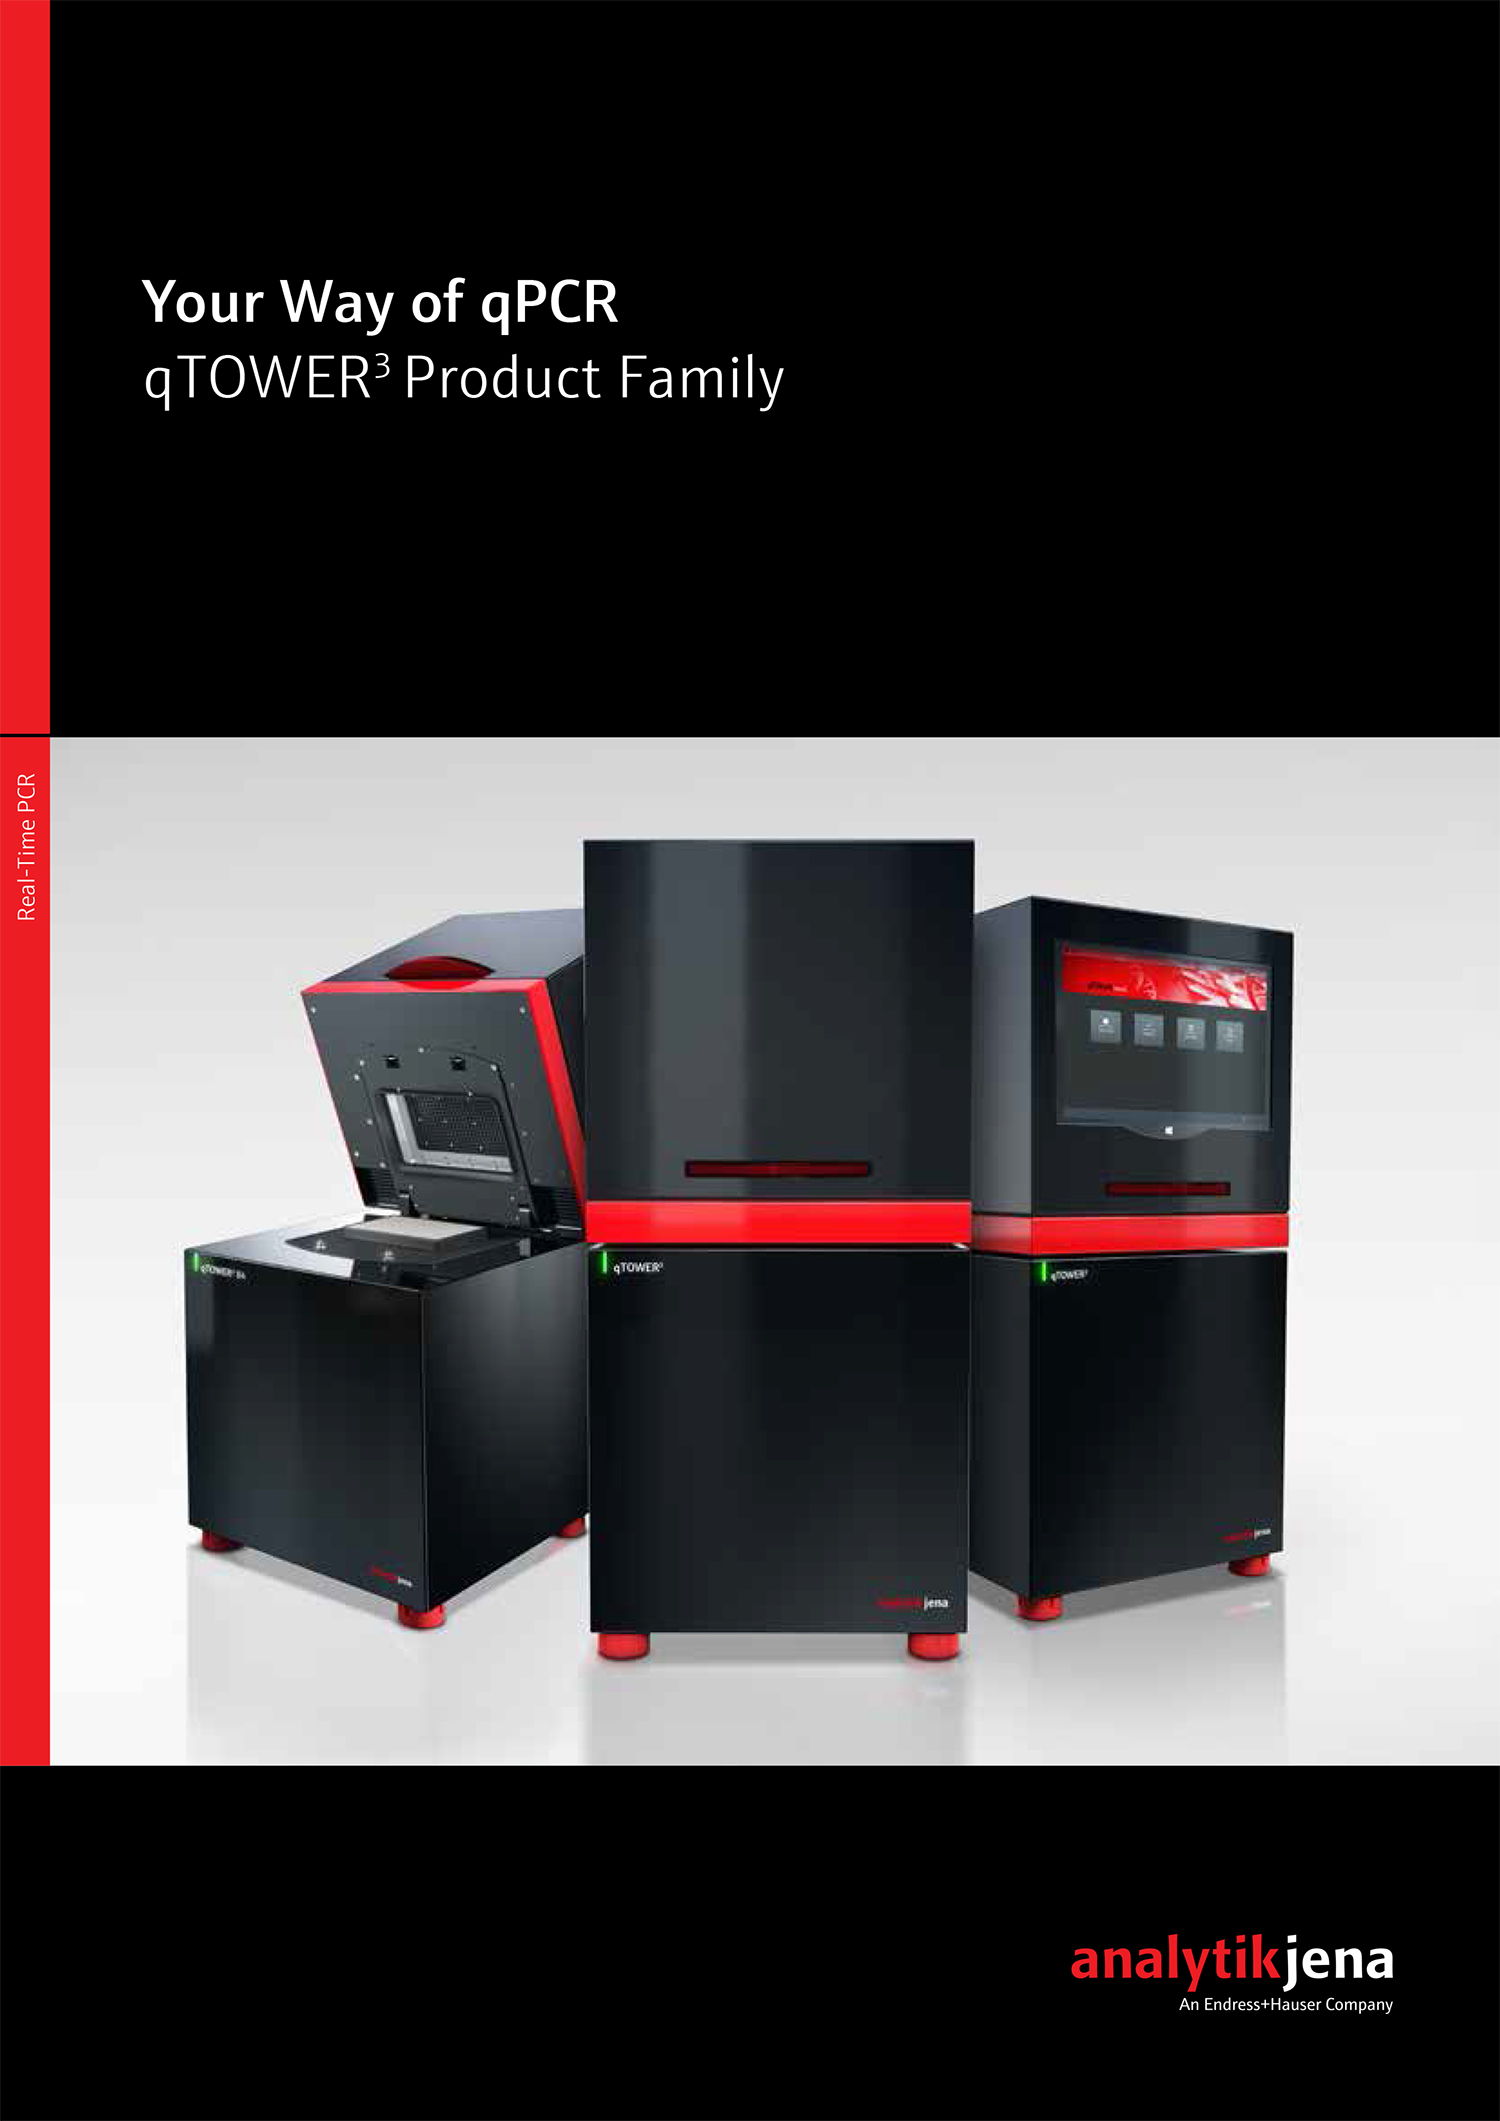 qTOWER3 Product family